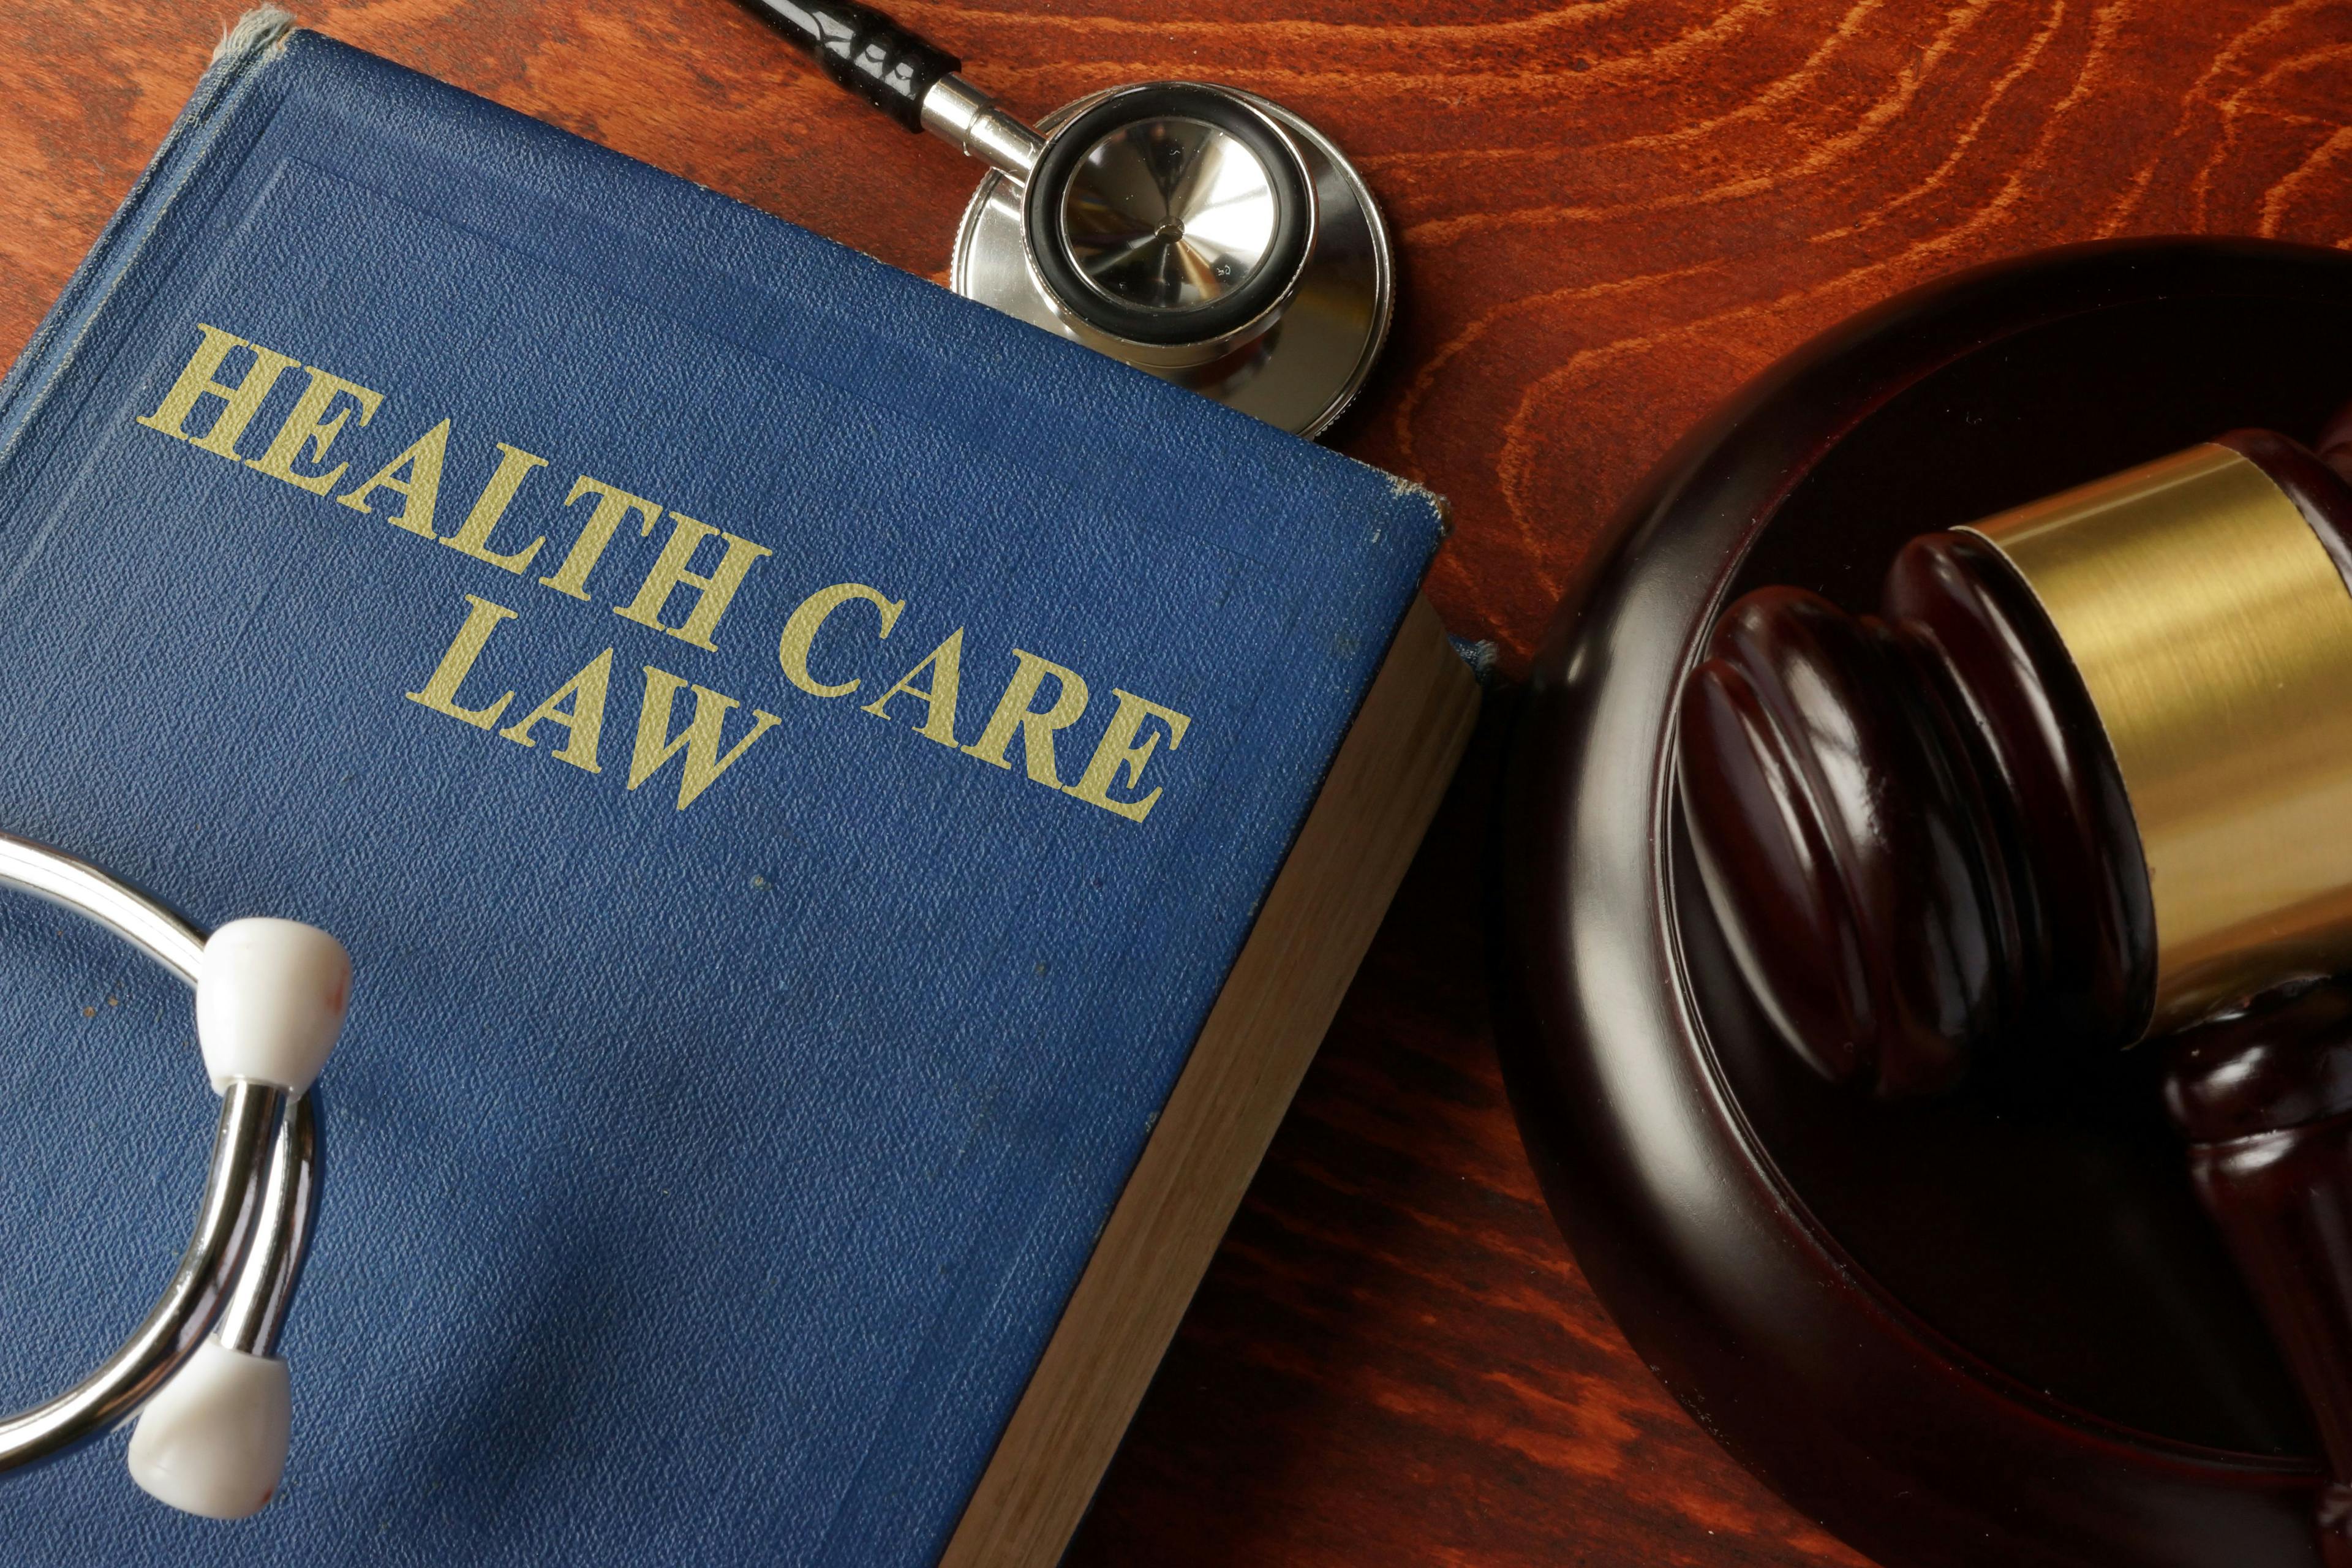 Advance care directives can prevent wrongful death lawsuits